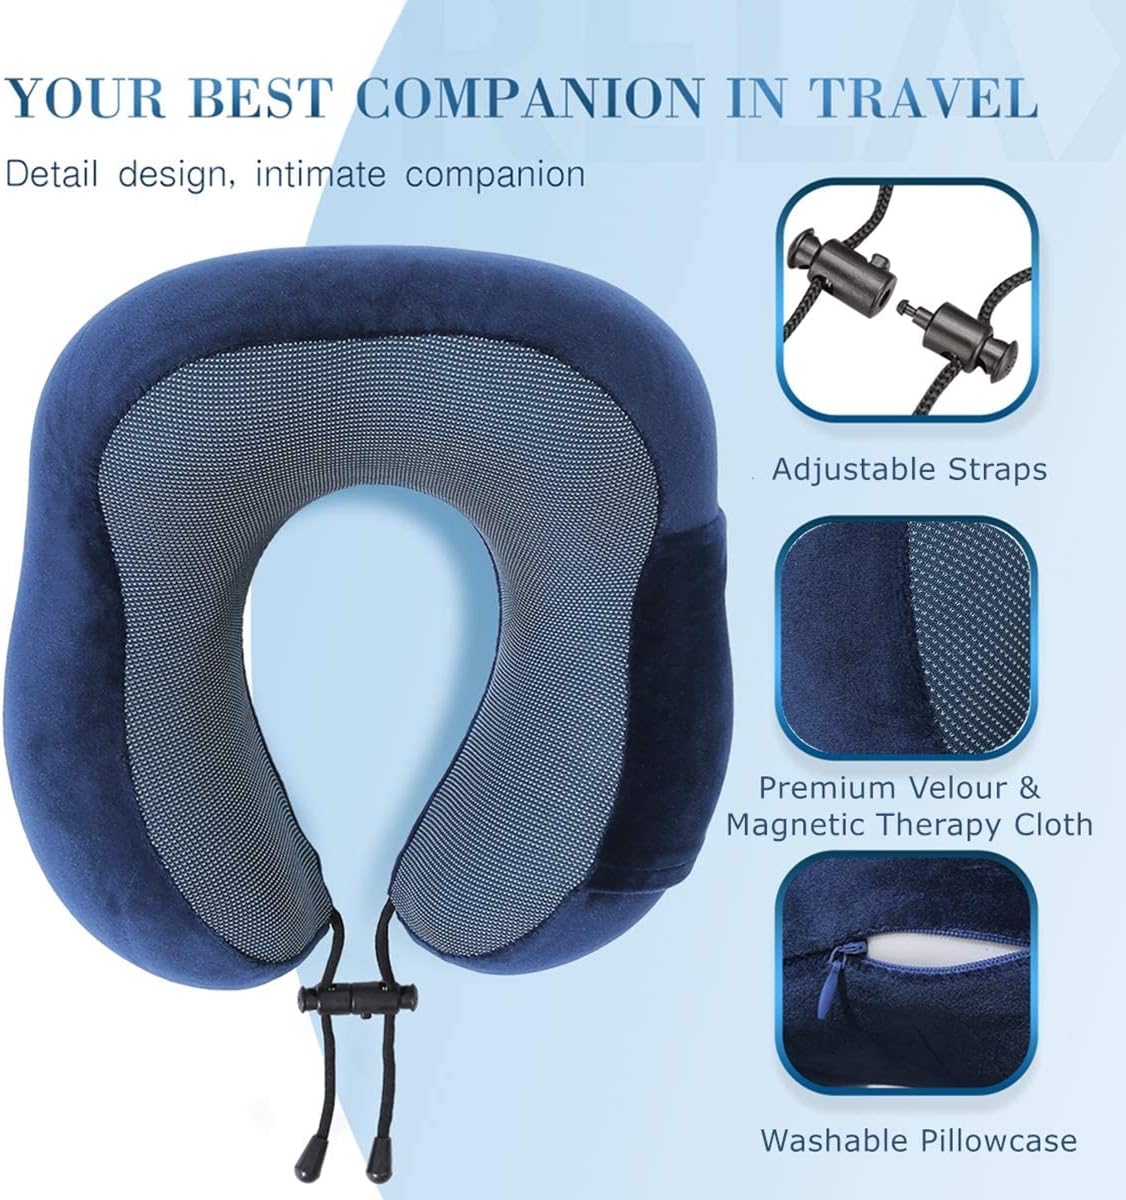 VIO Travel Pillow 100% Pure Memory Foam Neck Pillow with Machine Washable Cover, Airplane Travel Kit (BLUE)